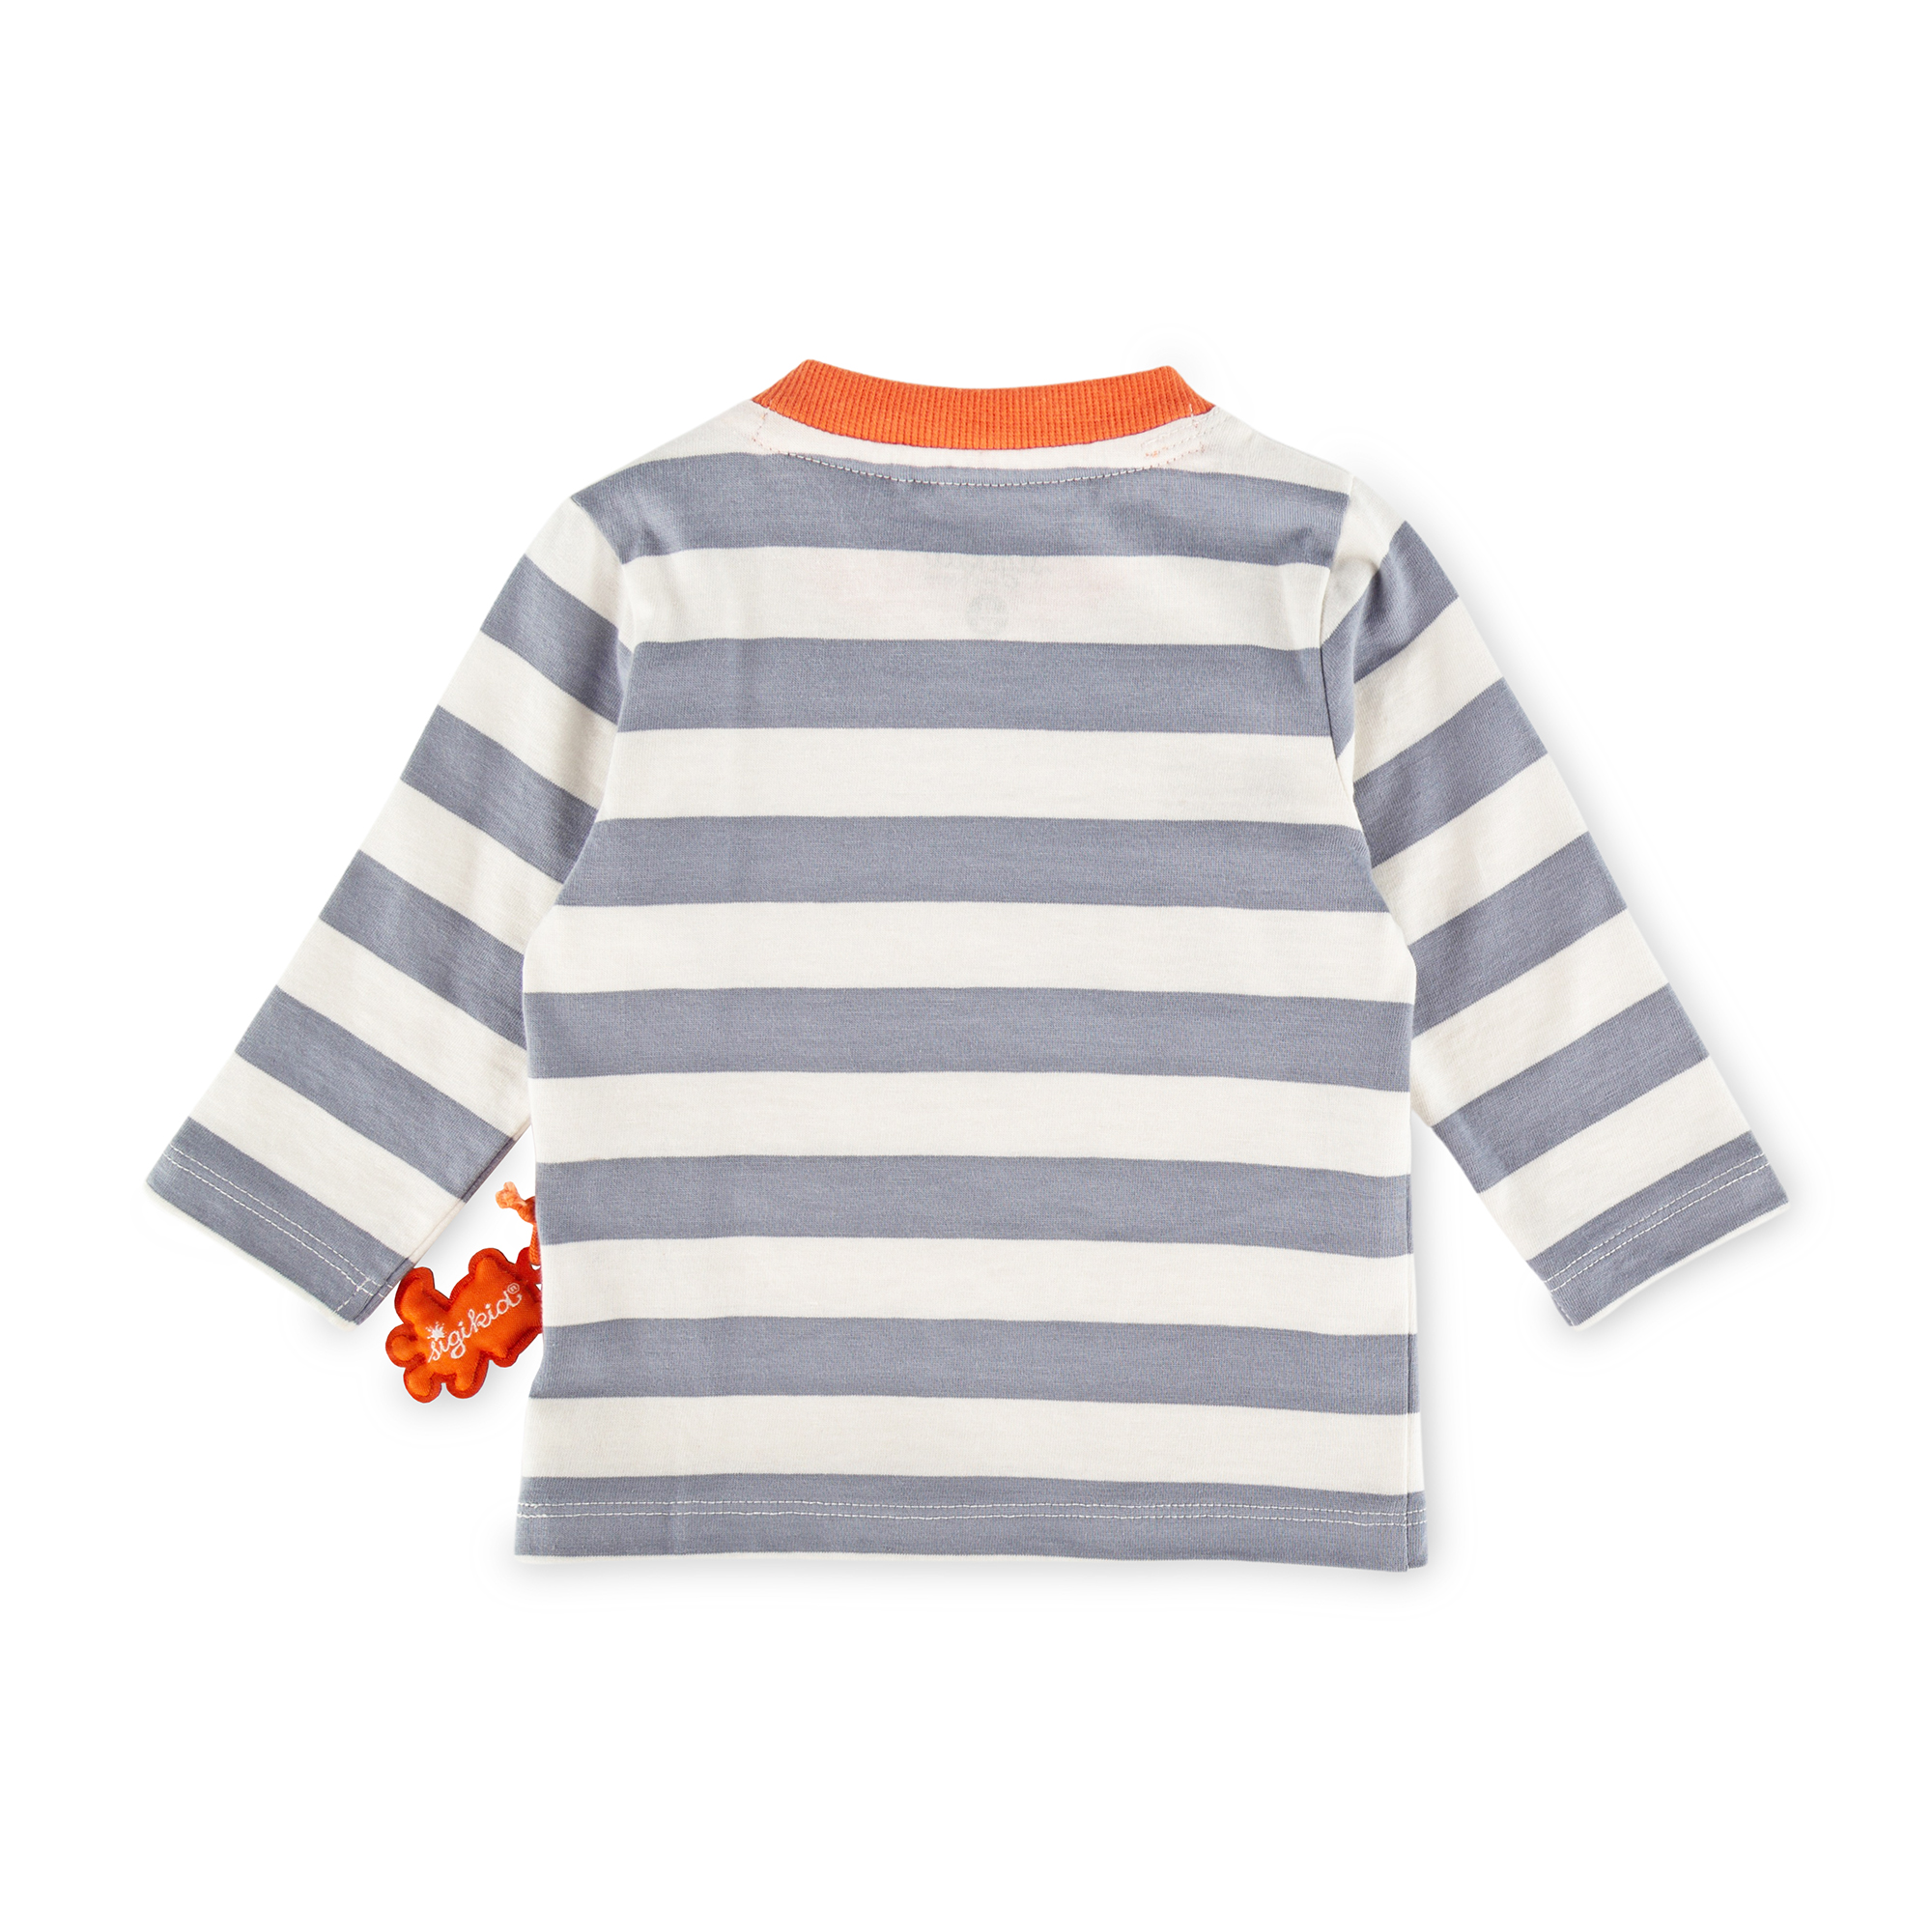 Striped baby long sleeve Tee tiger patch